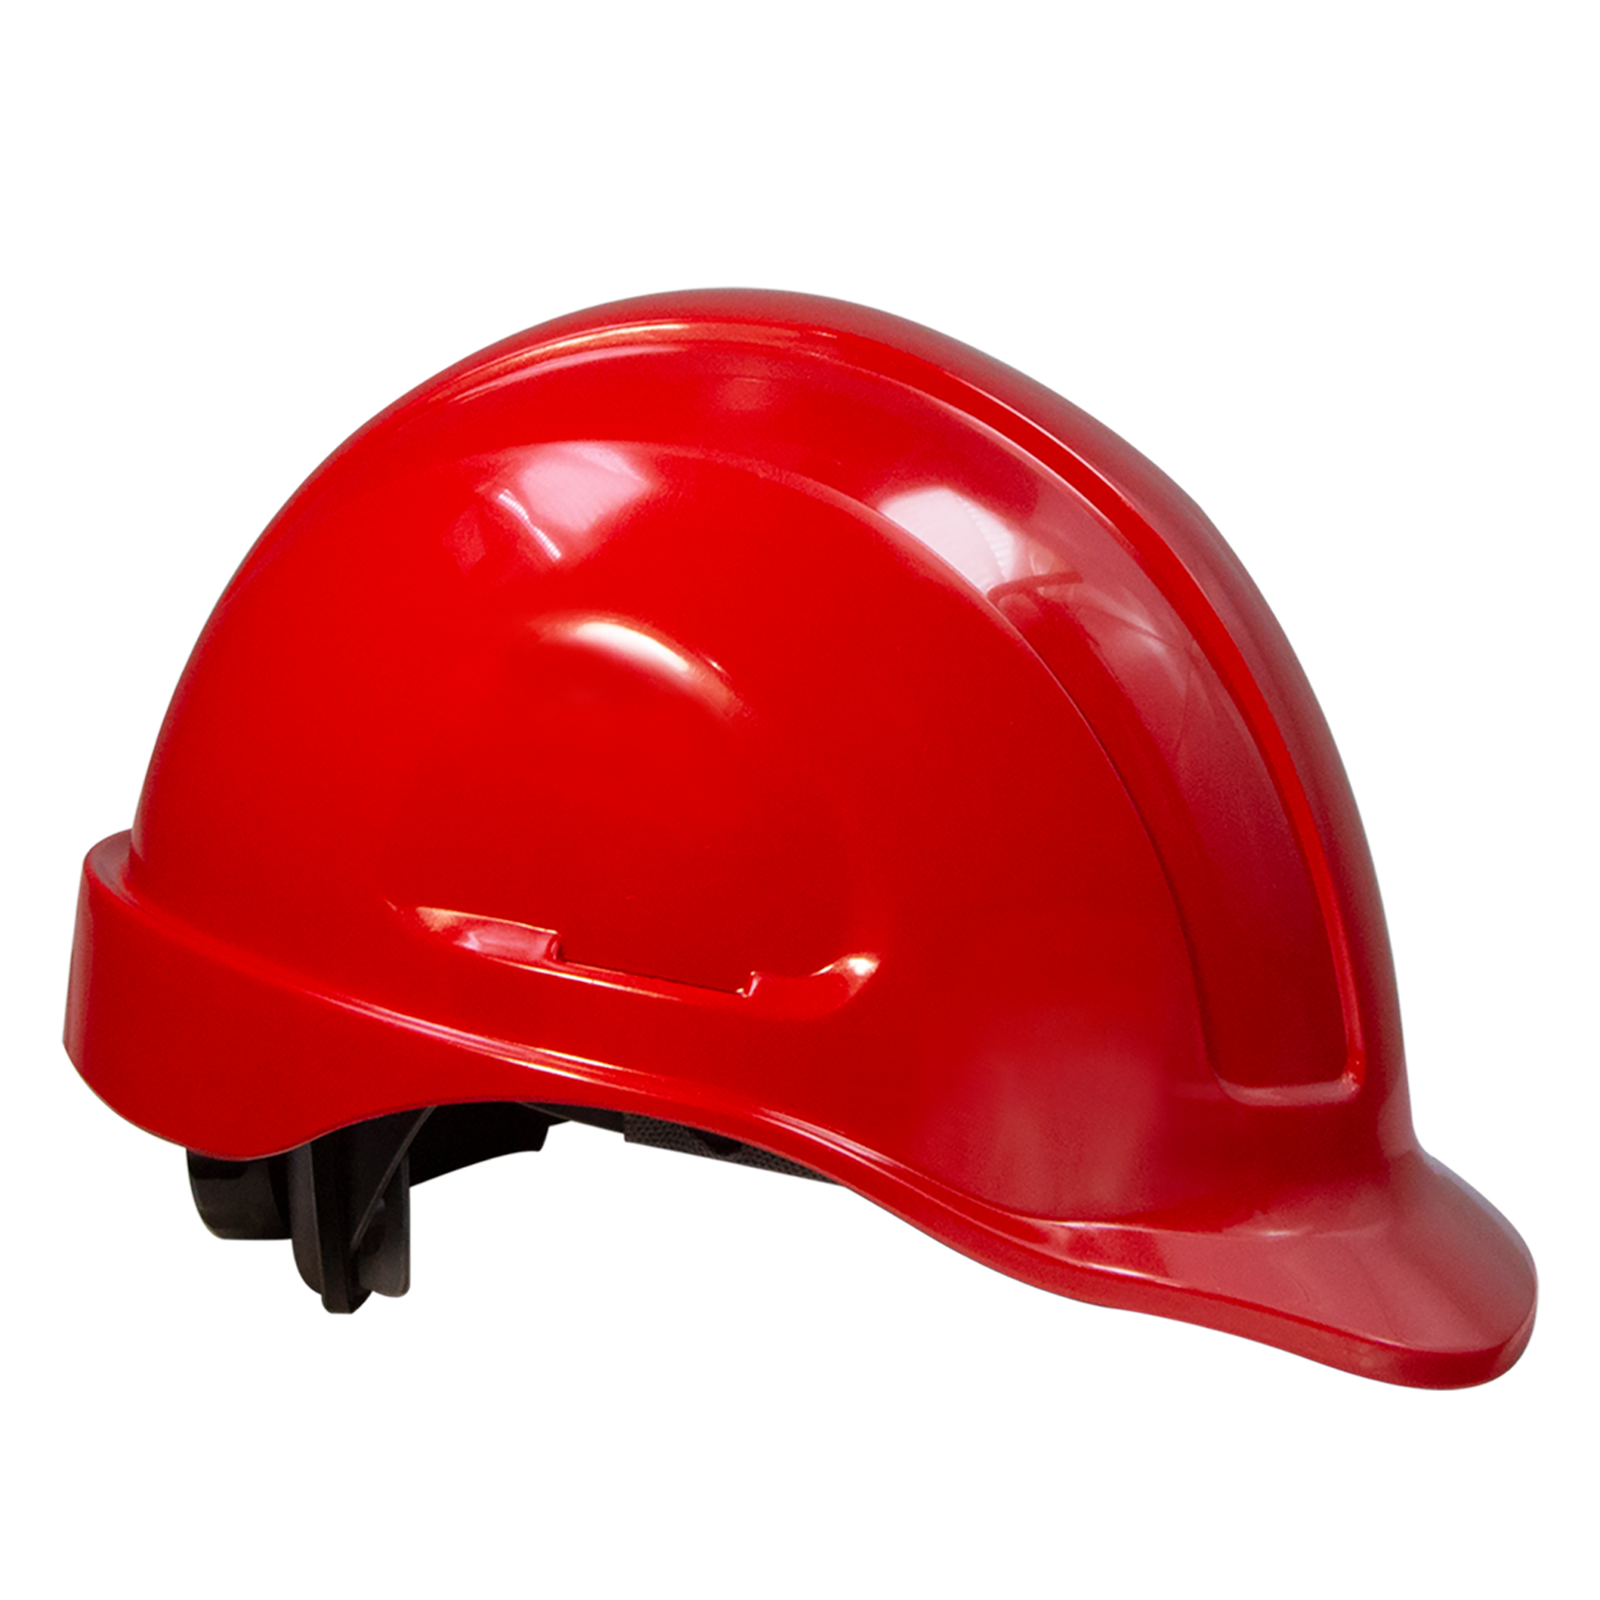 Red hard hat with slots compatible with JORESTECH Earmuffs